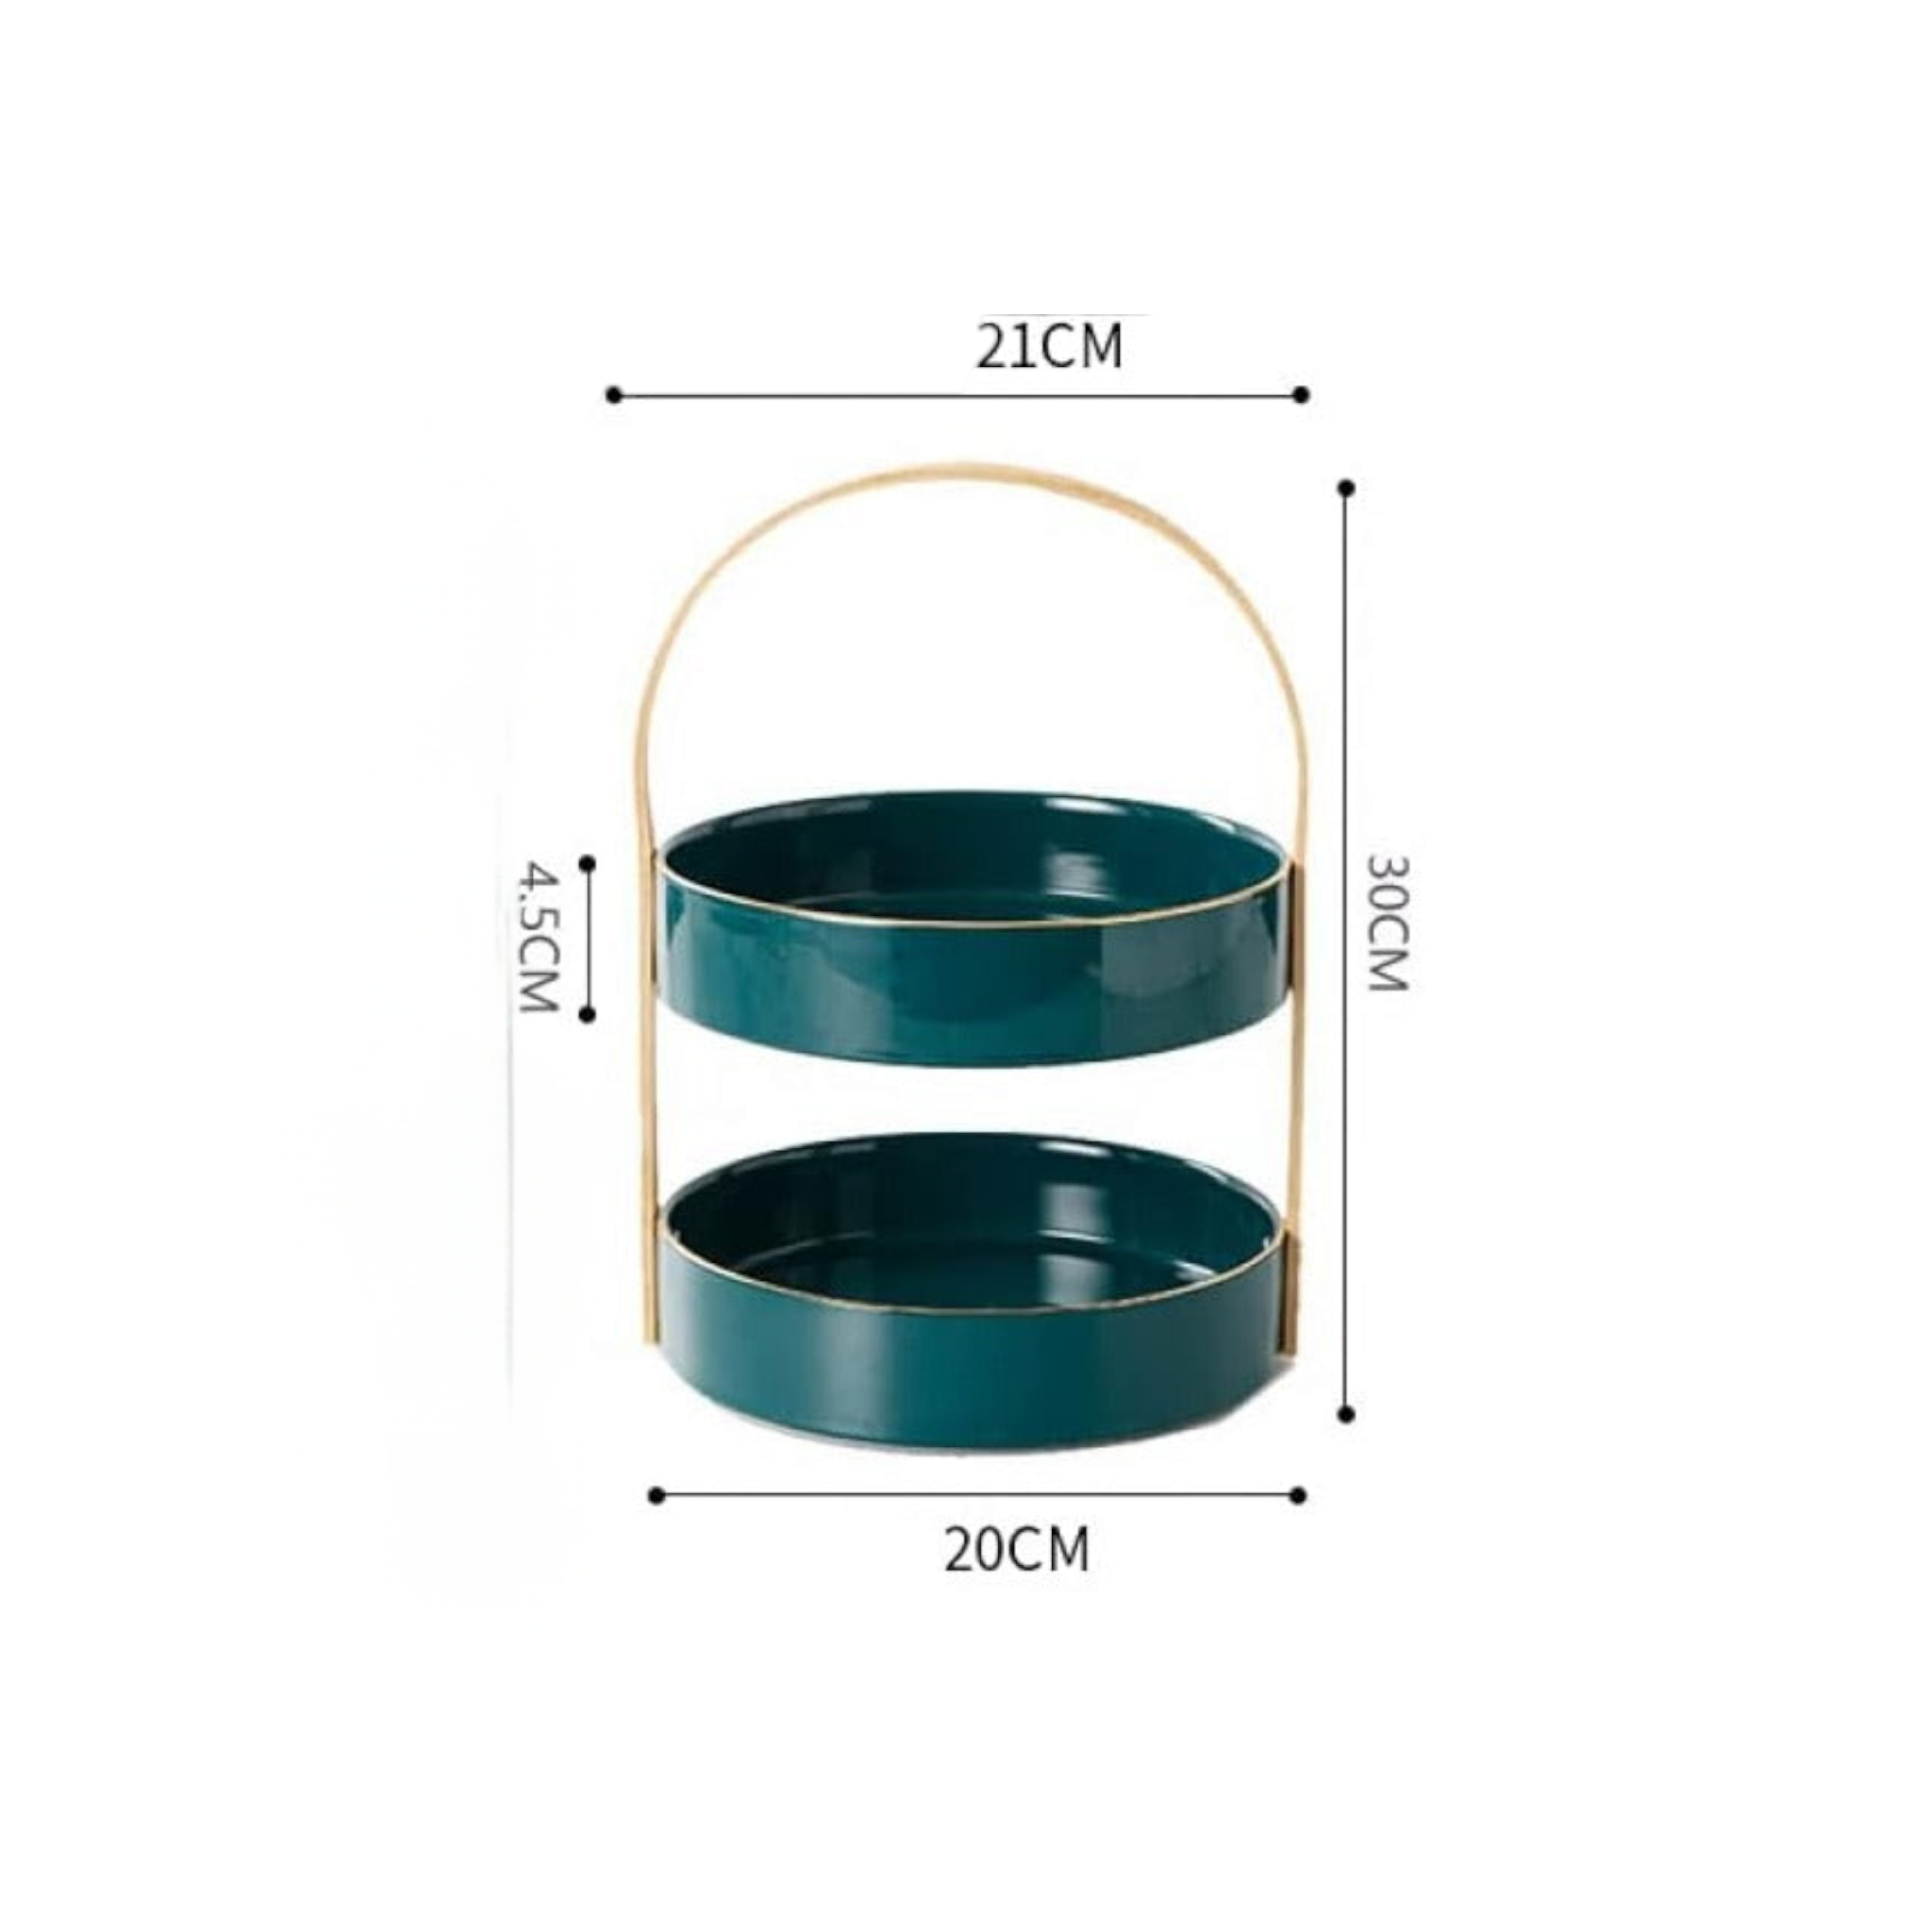 2-Tier Cake Fruit Stand Marble Green Oval Bowl Set with Natural Bamboo Frame